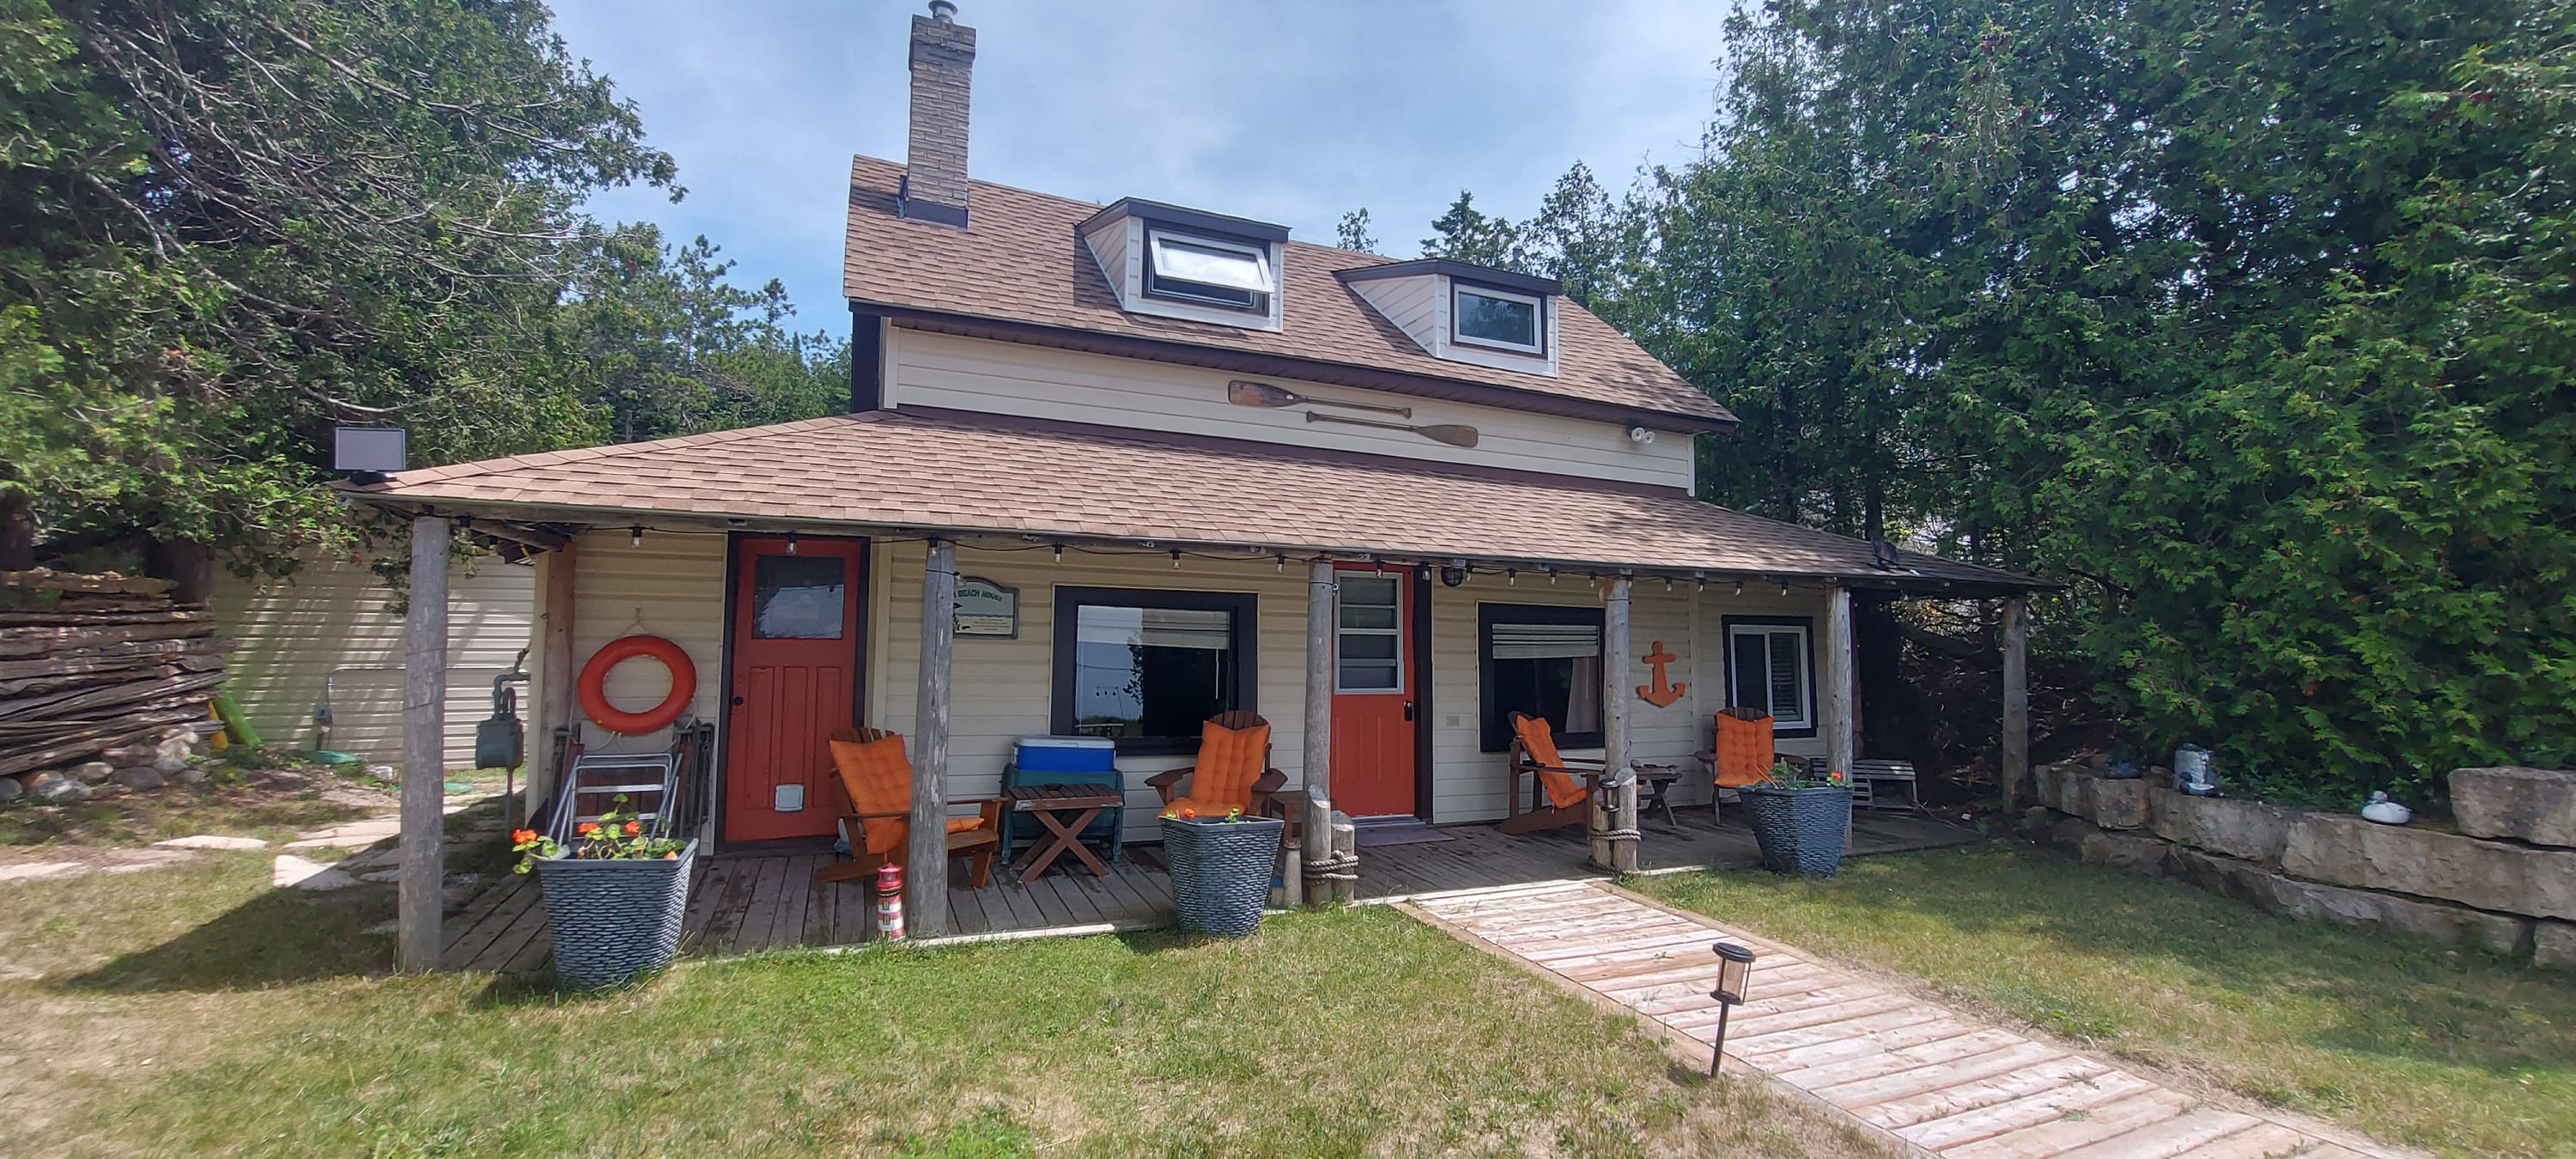 Cottage #1315|Lake Huron|Sauble Beach|Cottage Vacations|145120